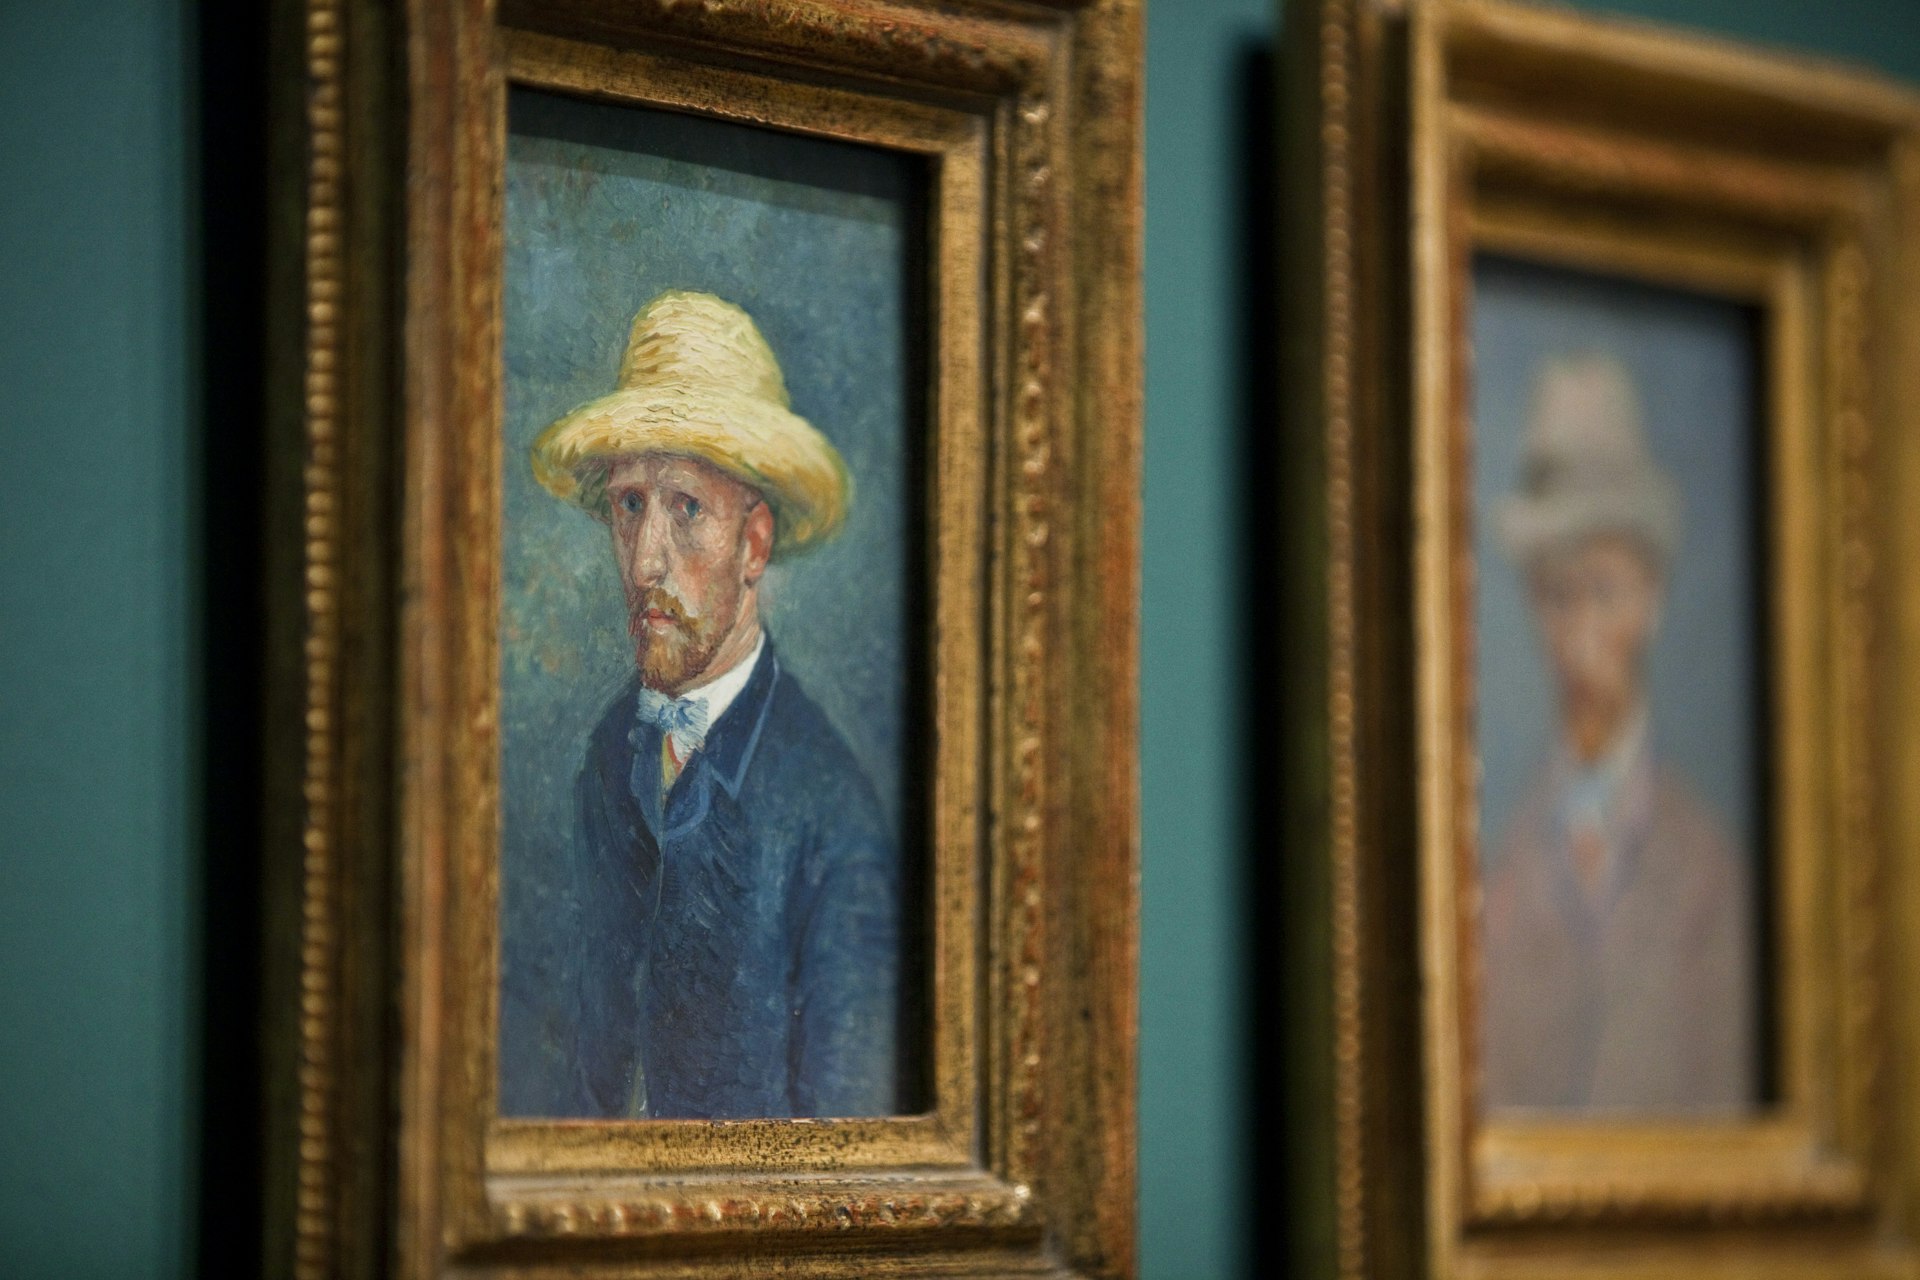 Two framed self-portraits of Vincent Van Gogh, hanging on the wall in the Van Gogh Museum, Amsterdam.